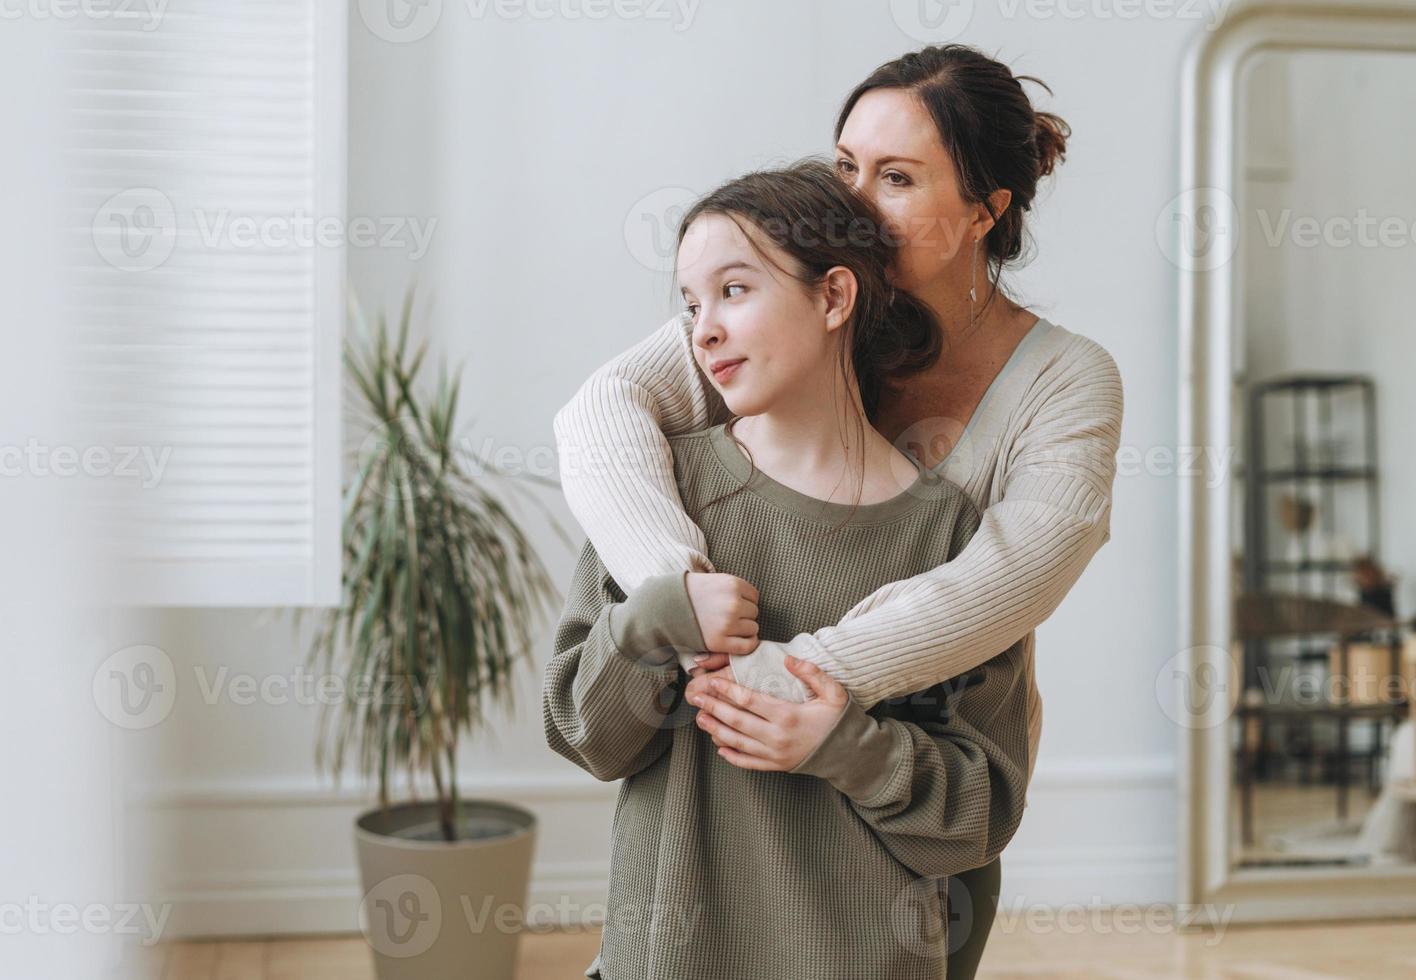 Portrait of mother middle age woman and daughter teenager together in thelight interior photo